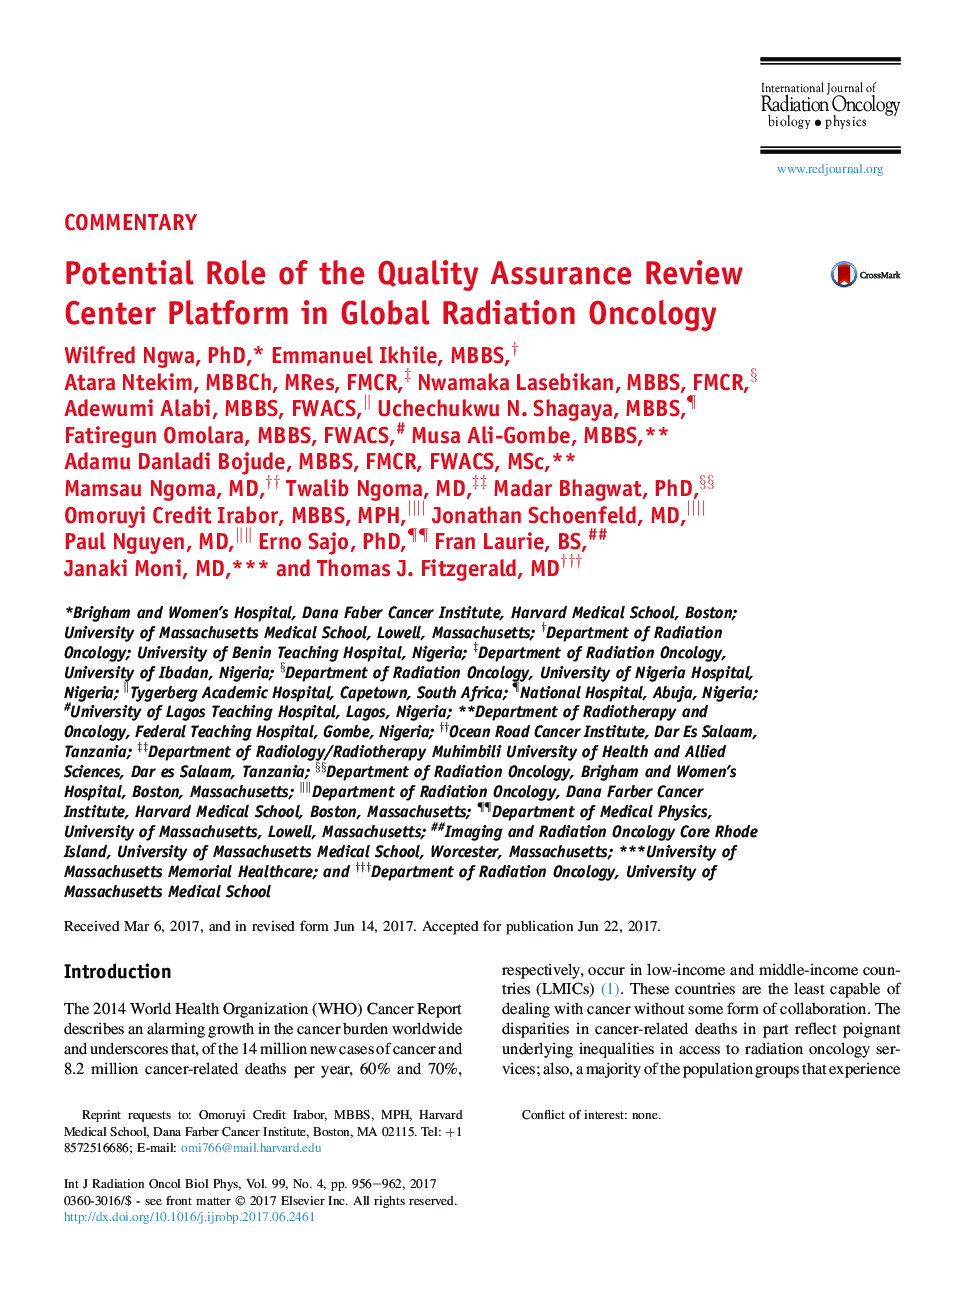 Potential Role of the Quality Assurance Review Center Platform in Global Radiation Oncology